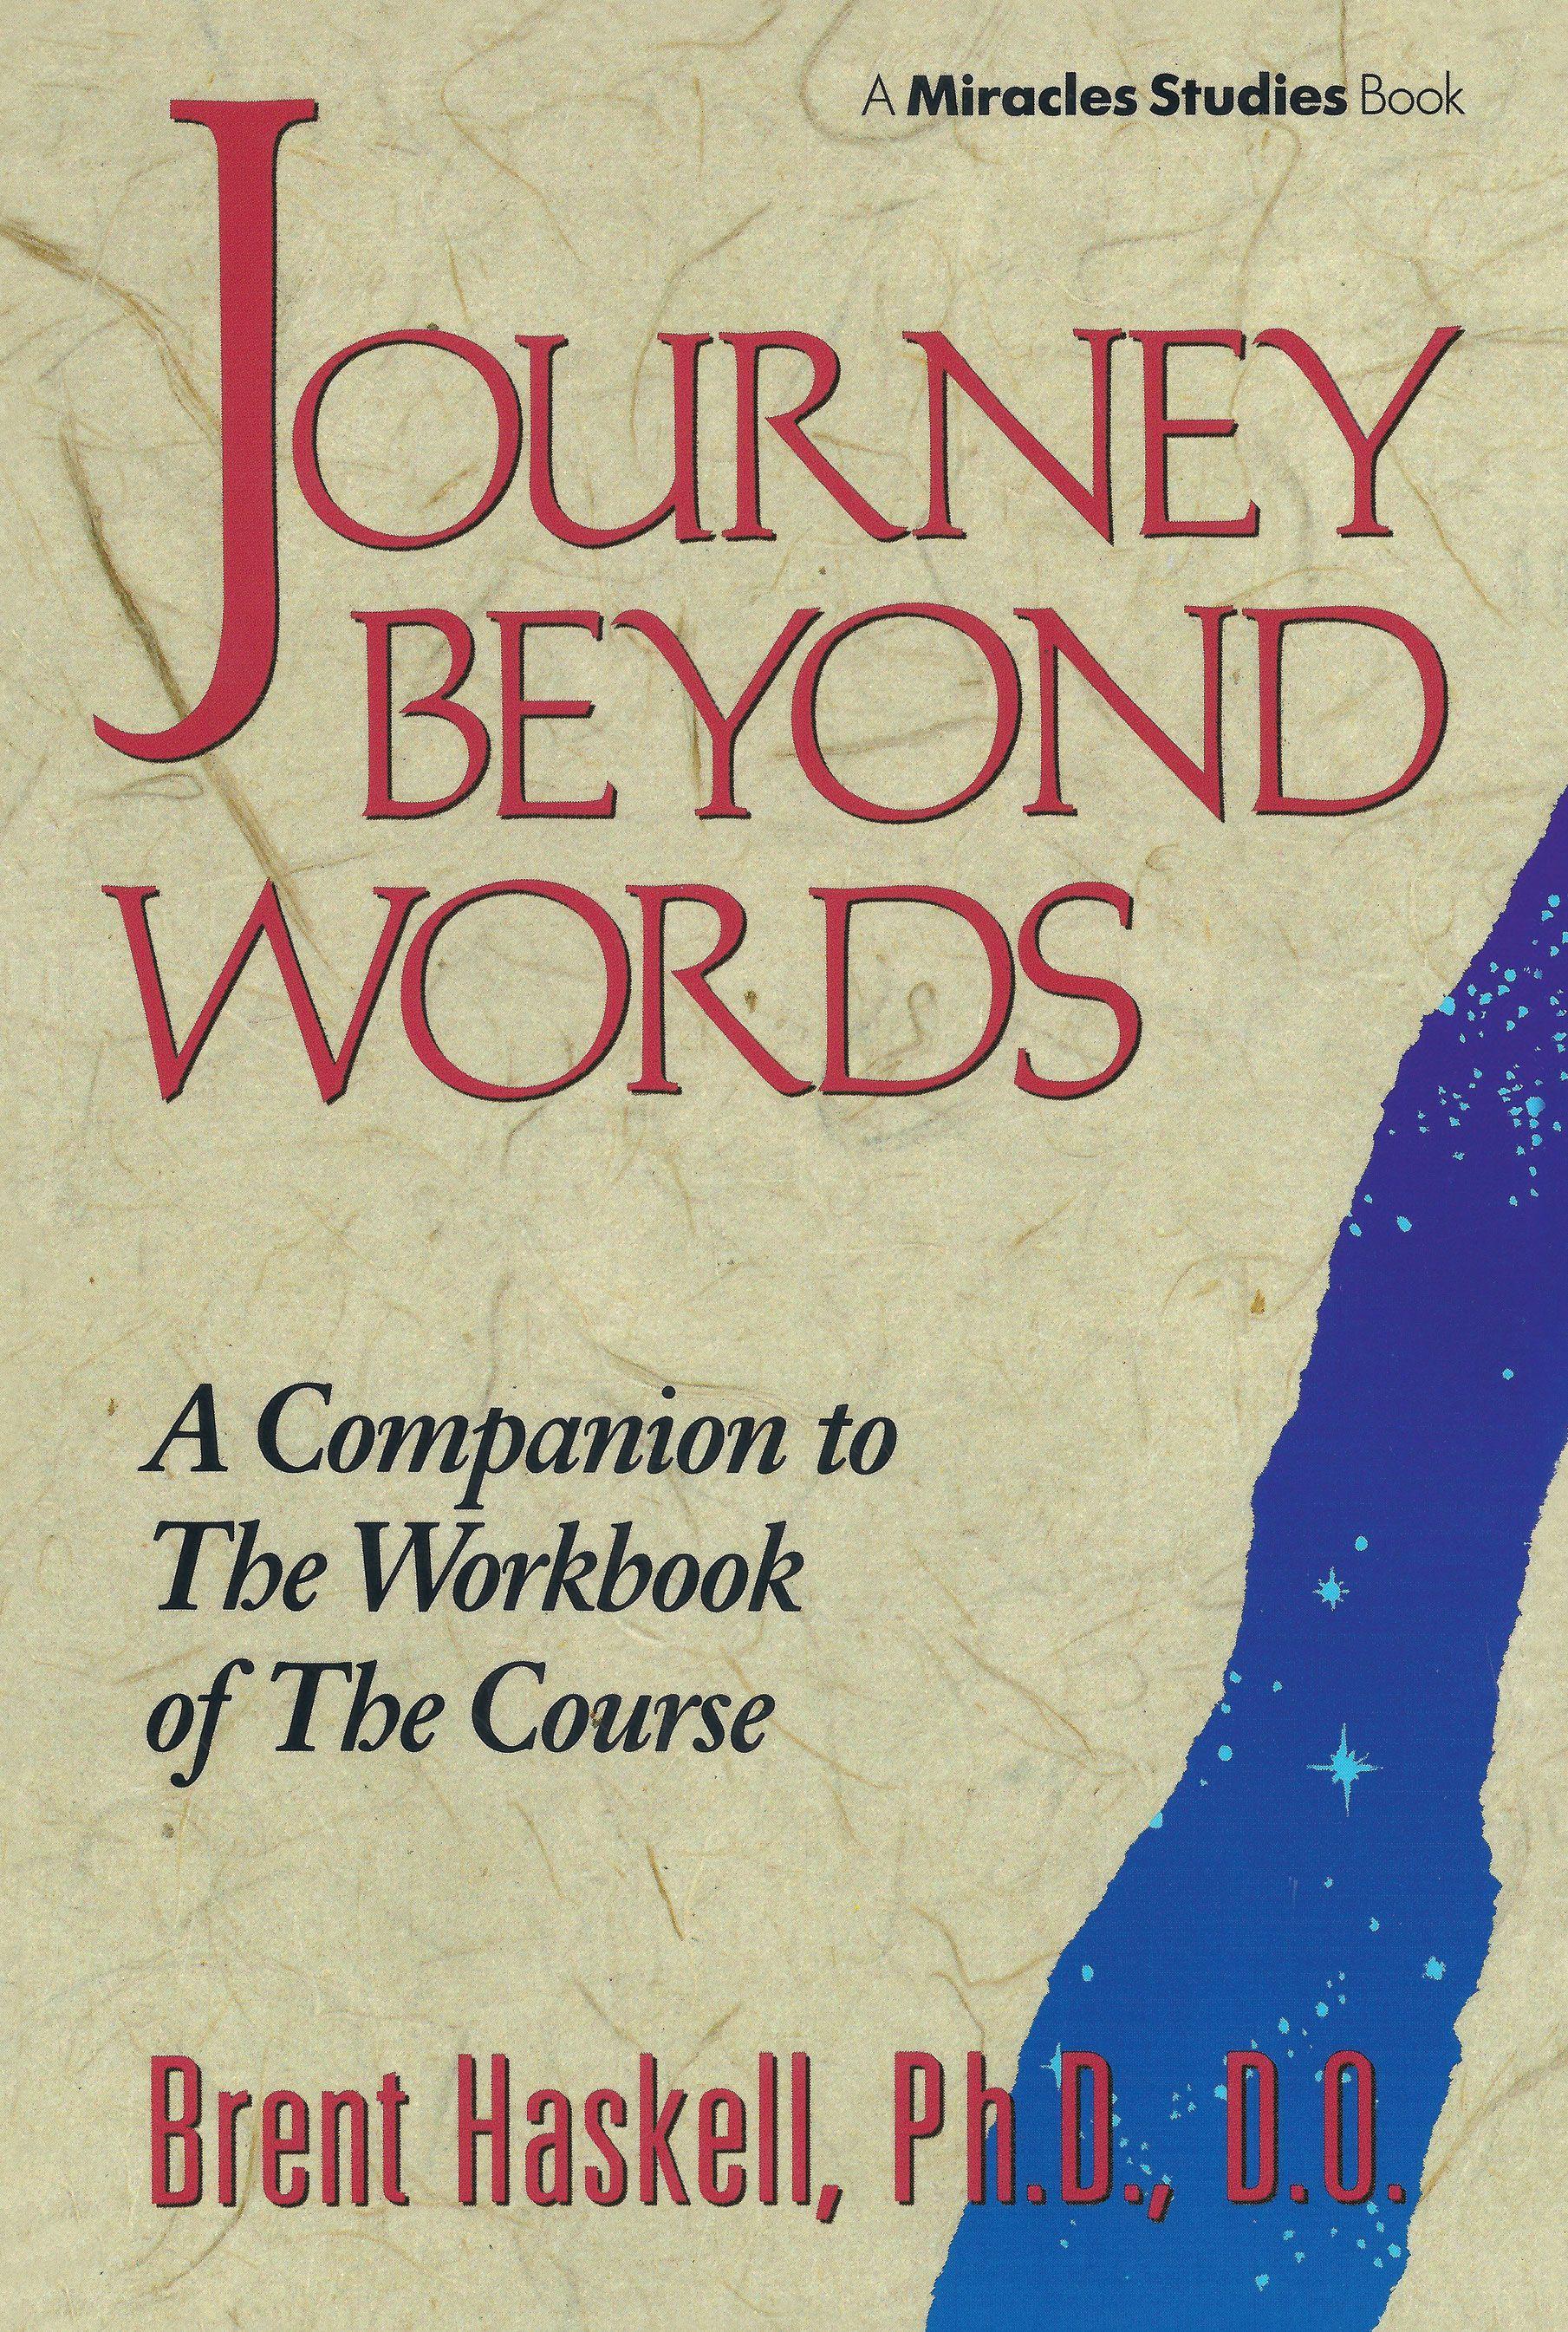 Journey Beyond Words / A Companion to the Workbook of the Course (Miracles Studies Book) / Brent Haskell / Taschenbuch / Englisch / 1994 / DEVORSS & CO / EAN 9780875166957 - Haskell, Brent